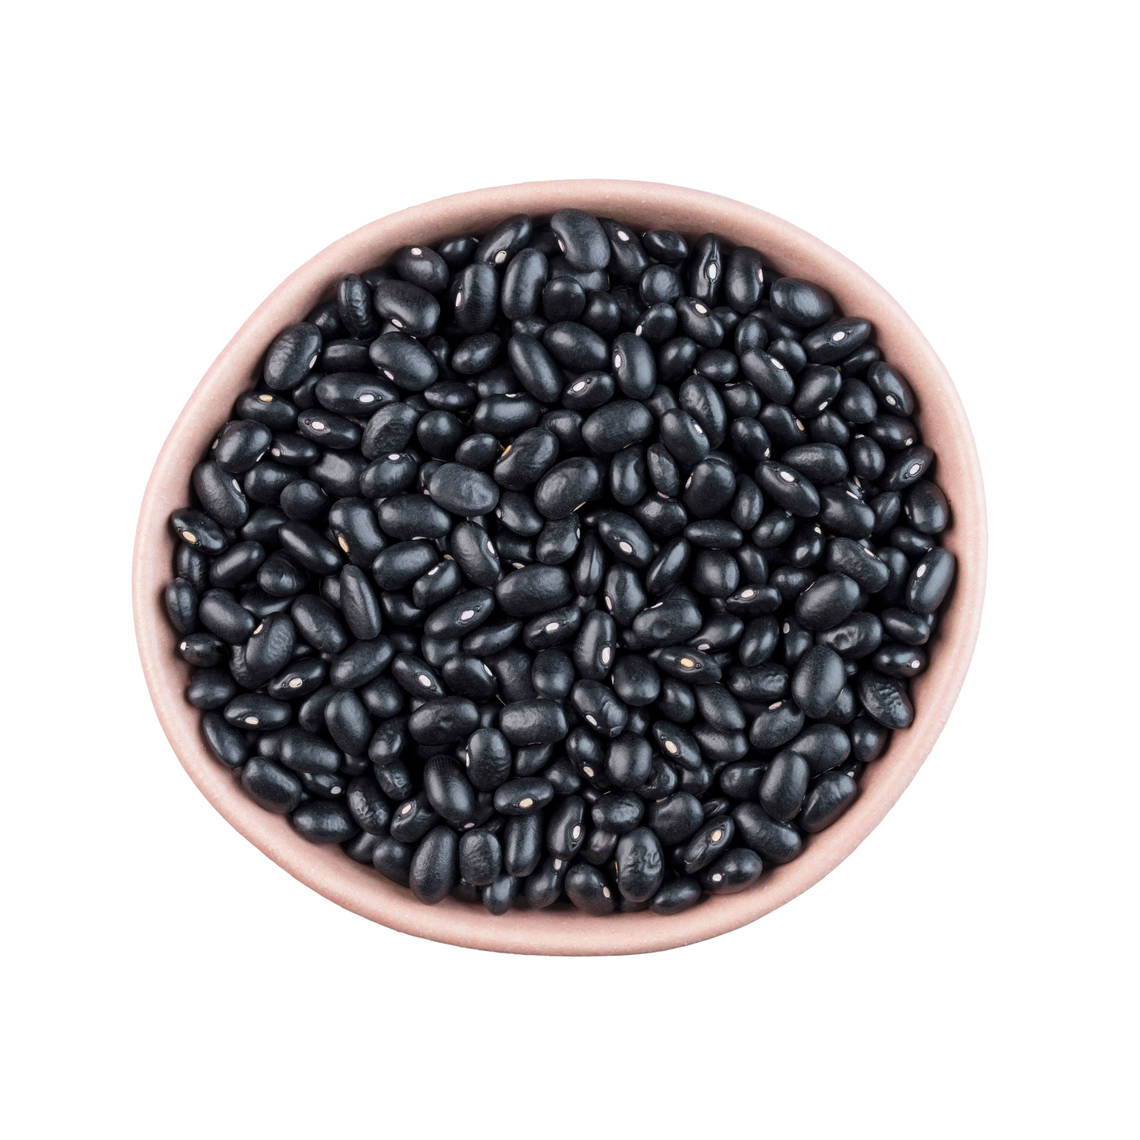 Enjoyed by meat eaters and vegetarians alike, black beans are one of the most versatile legumes.